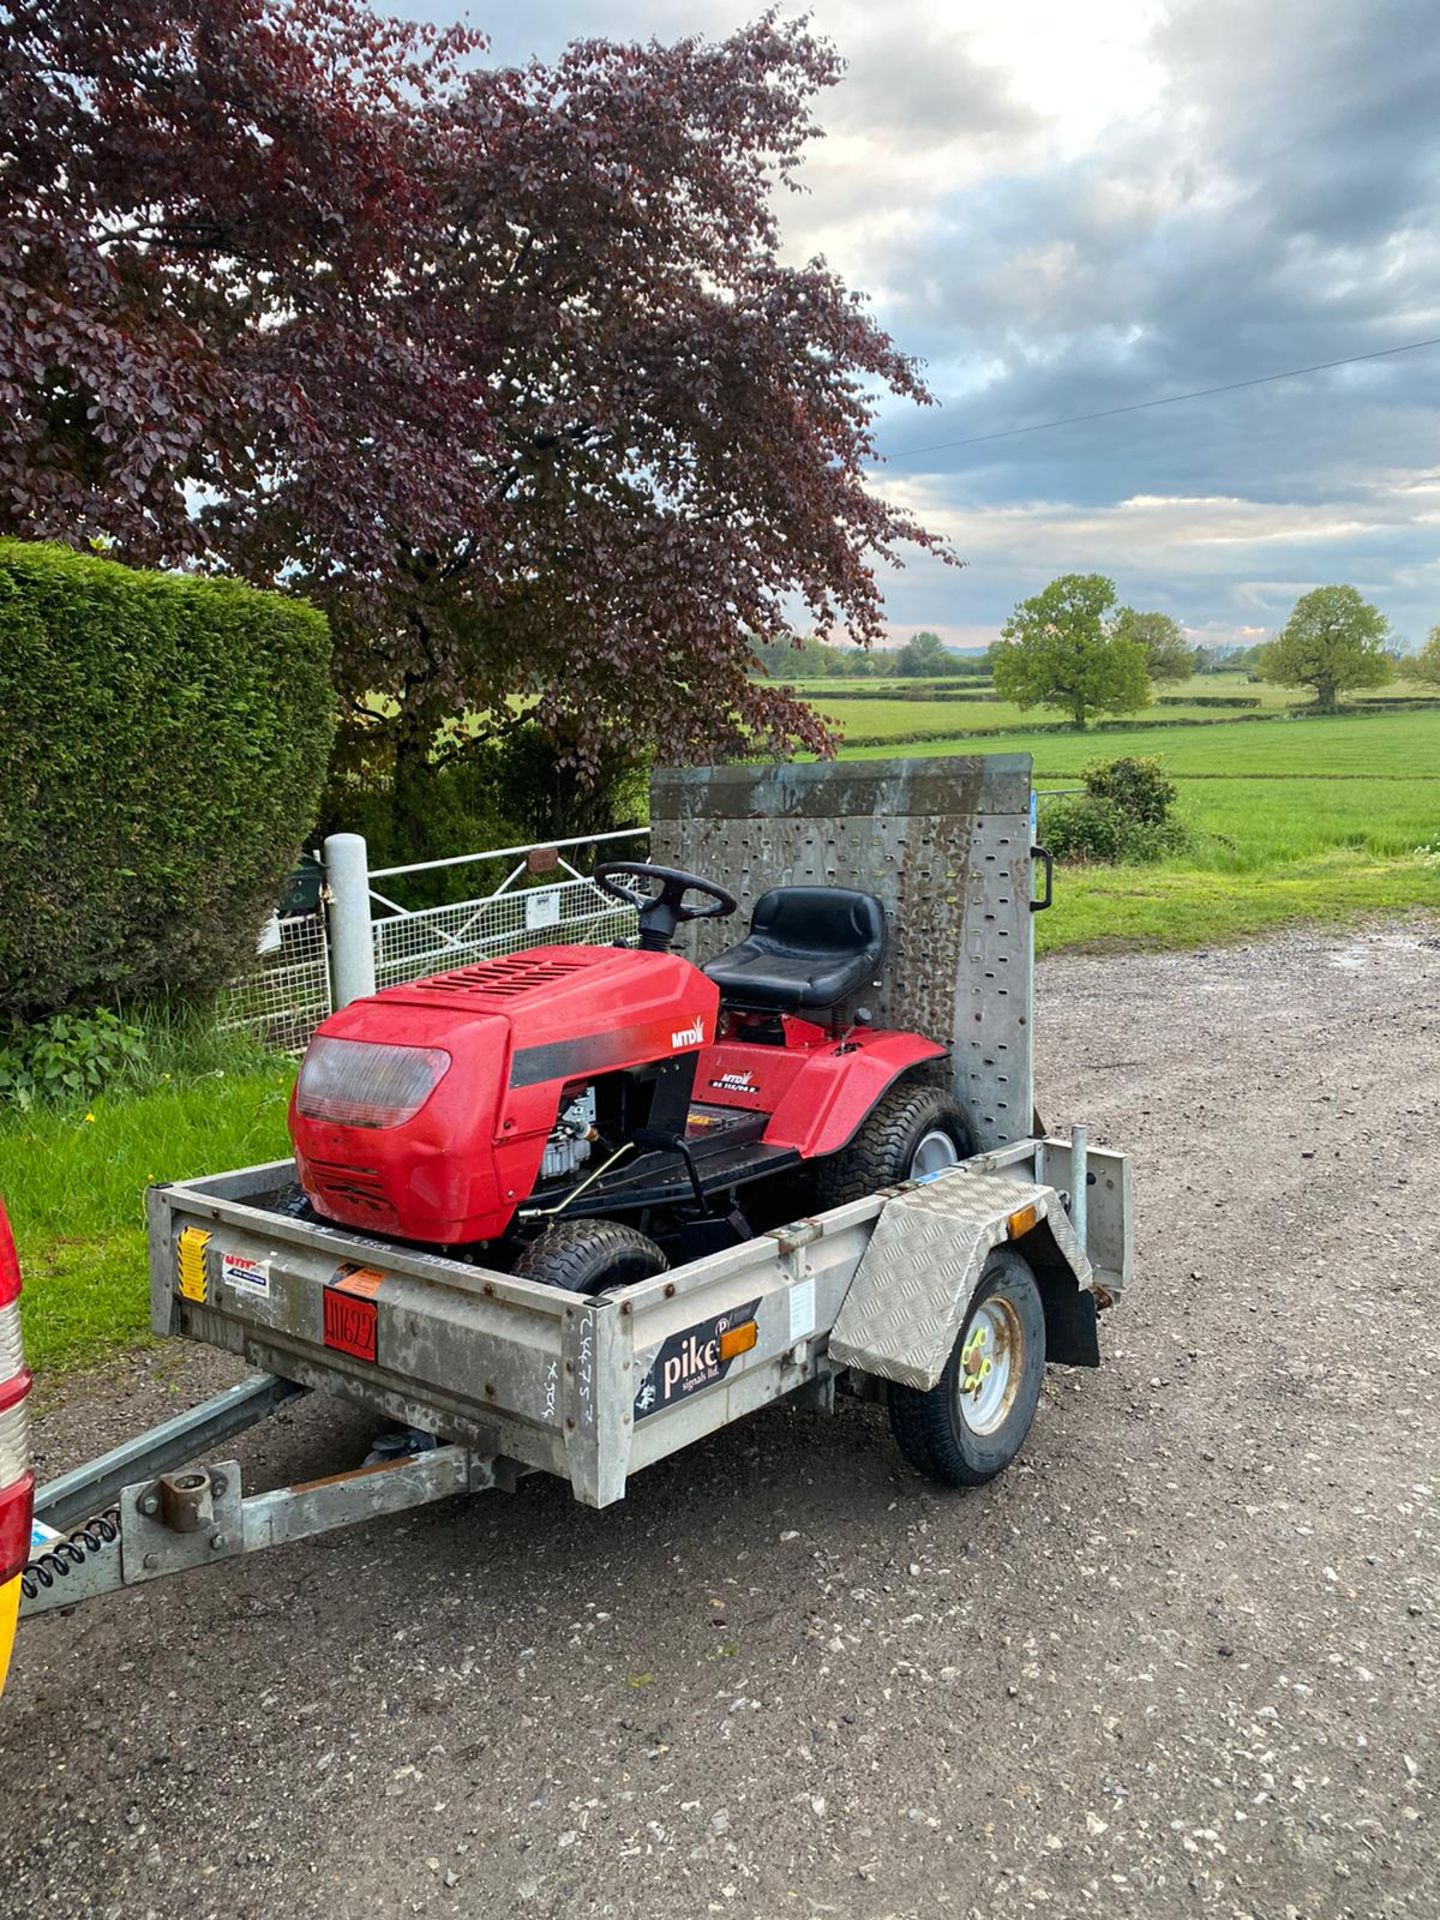 SINGLE AXLE PLANT TRAILER COMES WITH MTD RIDE ON LAWN MOWER, RUNS DRIVES AND CUTS *NO VAT* - Image 4 of 8